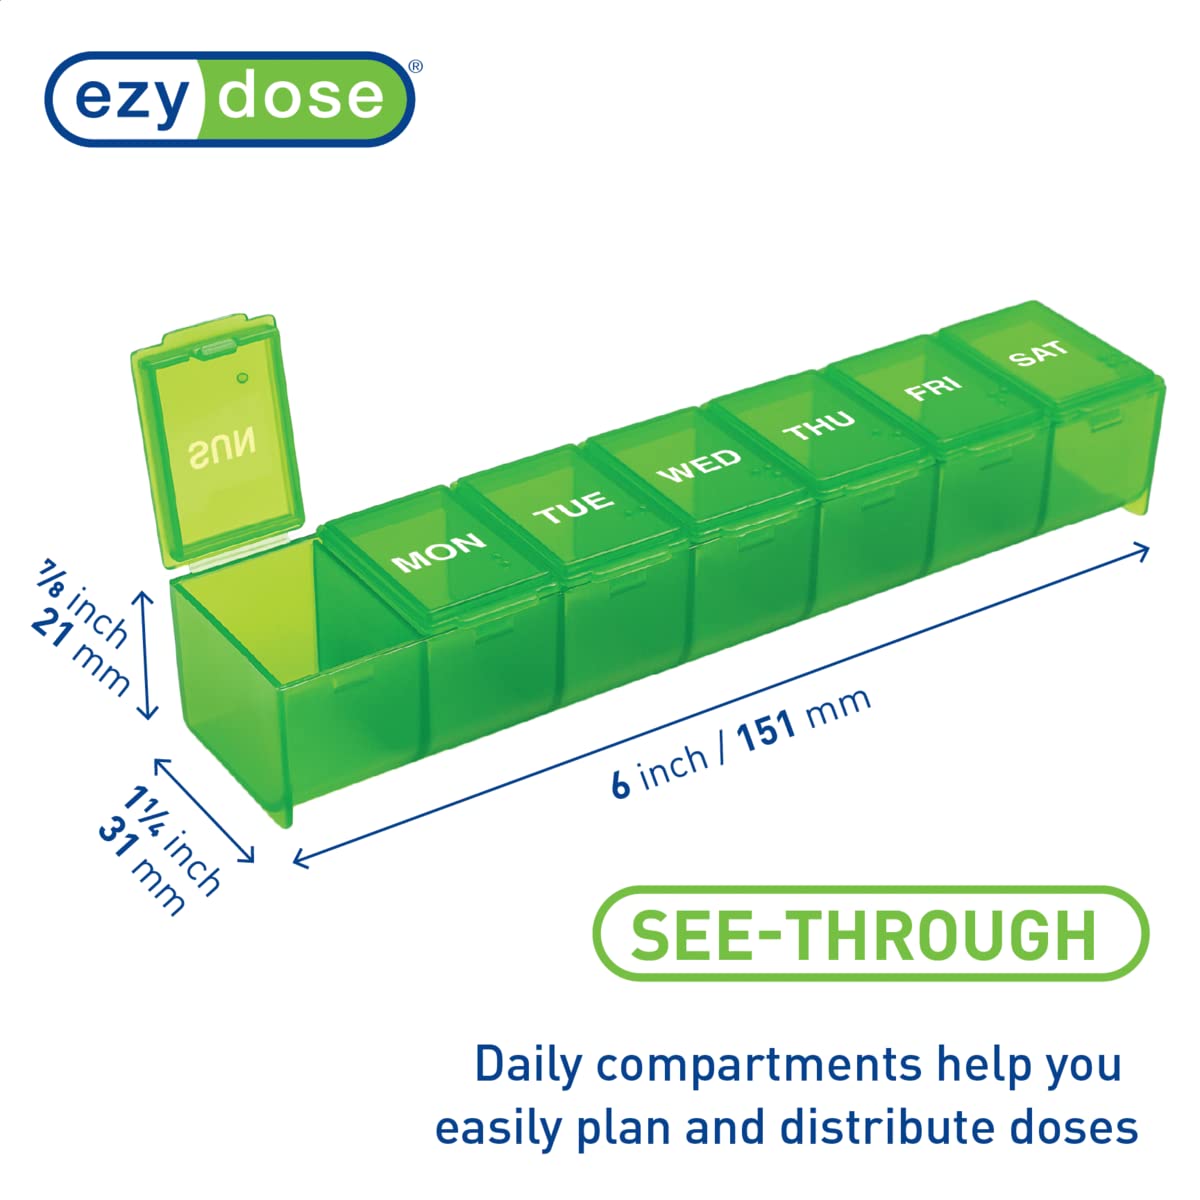 EZY DOSE Weekly (7-Day) Pill Organizer, Vitamin Case, and Medicine Box, Large Compartments, Color May Vary